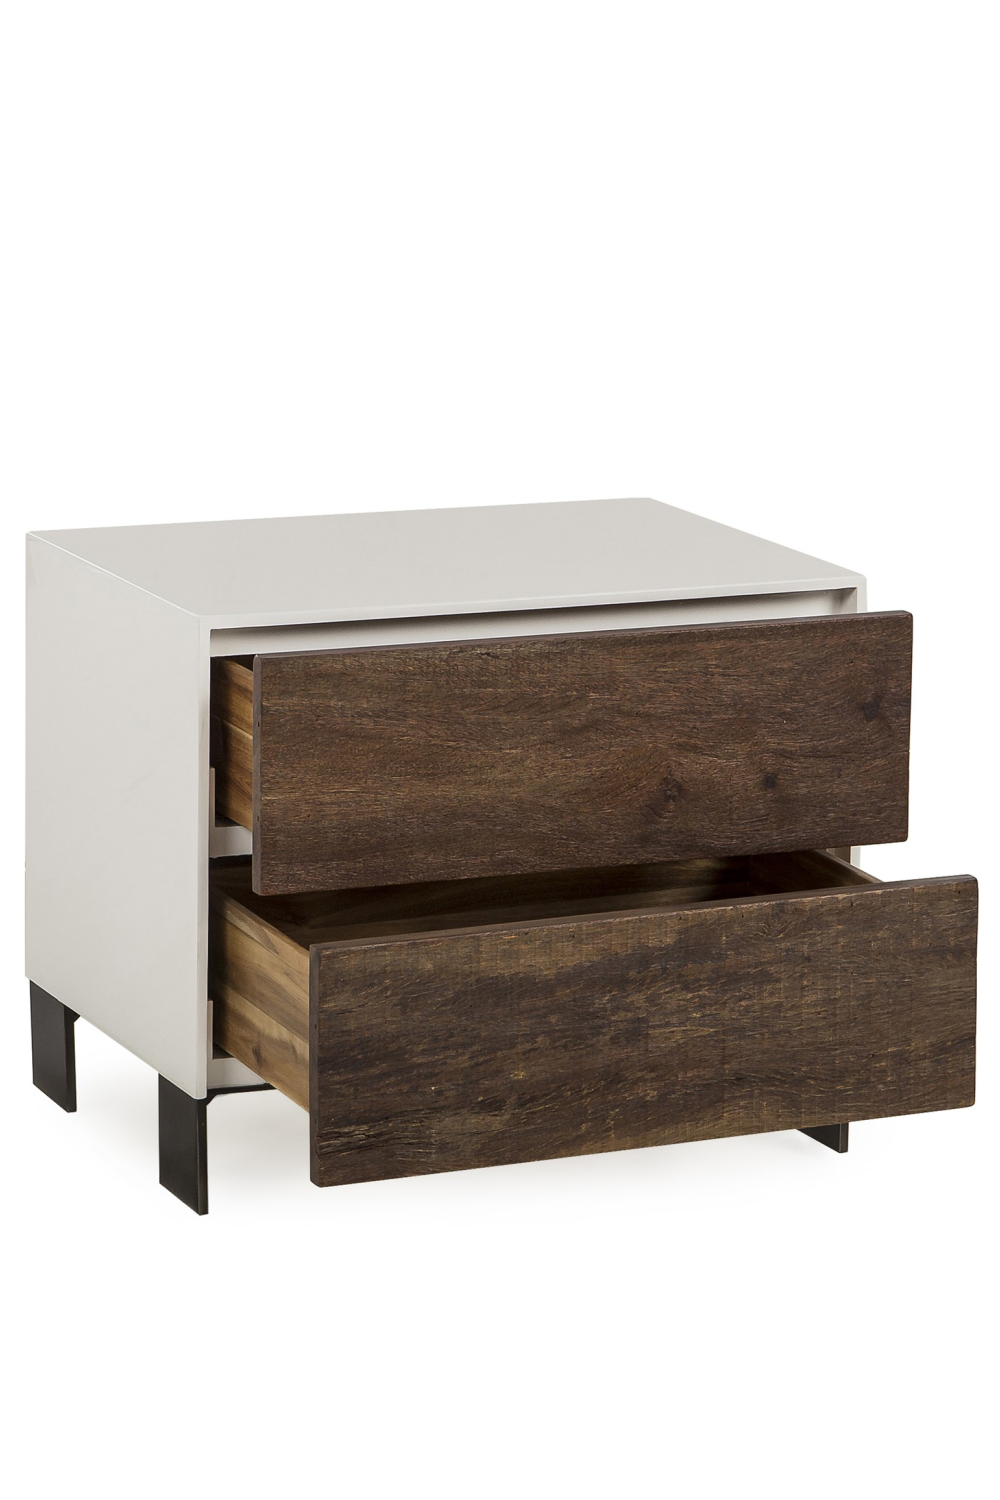 White Bedside Table with Peroba Drawers | Andrew Martin Cardosa | OROA